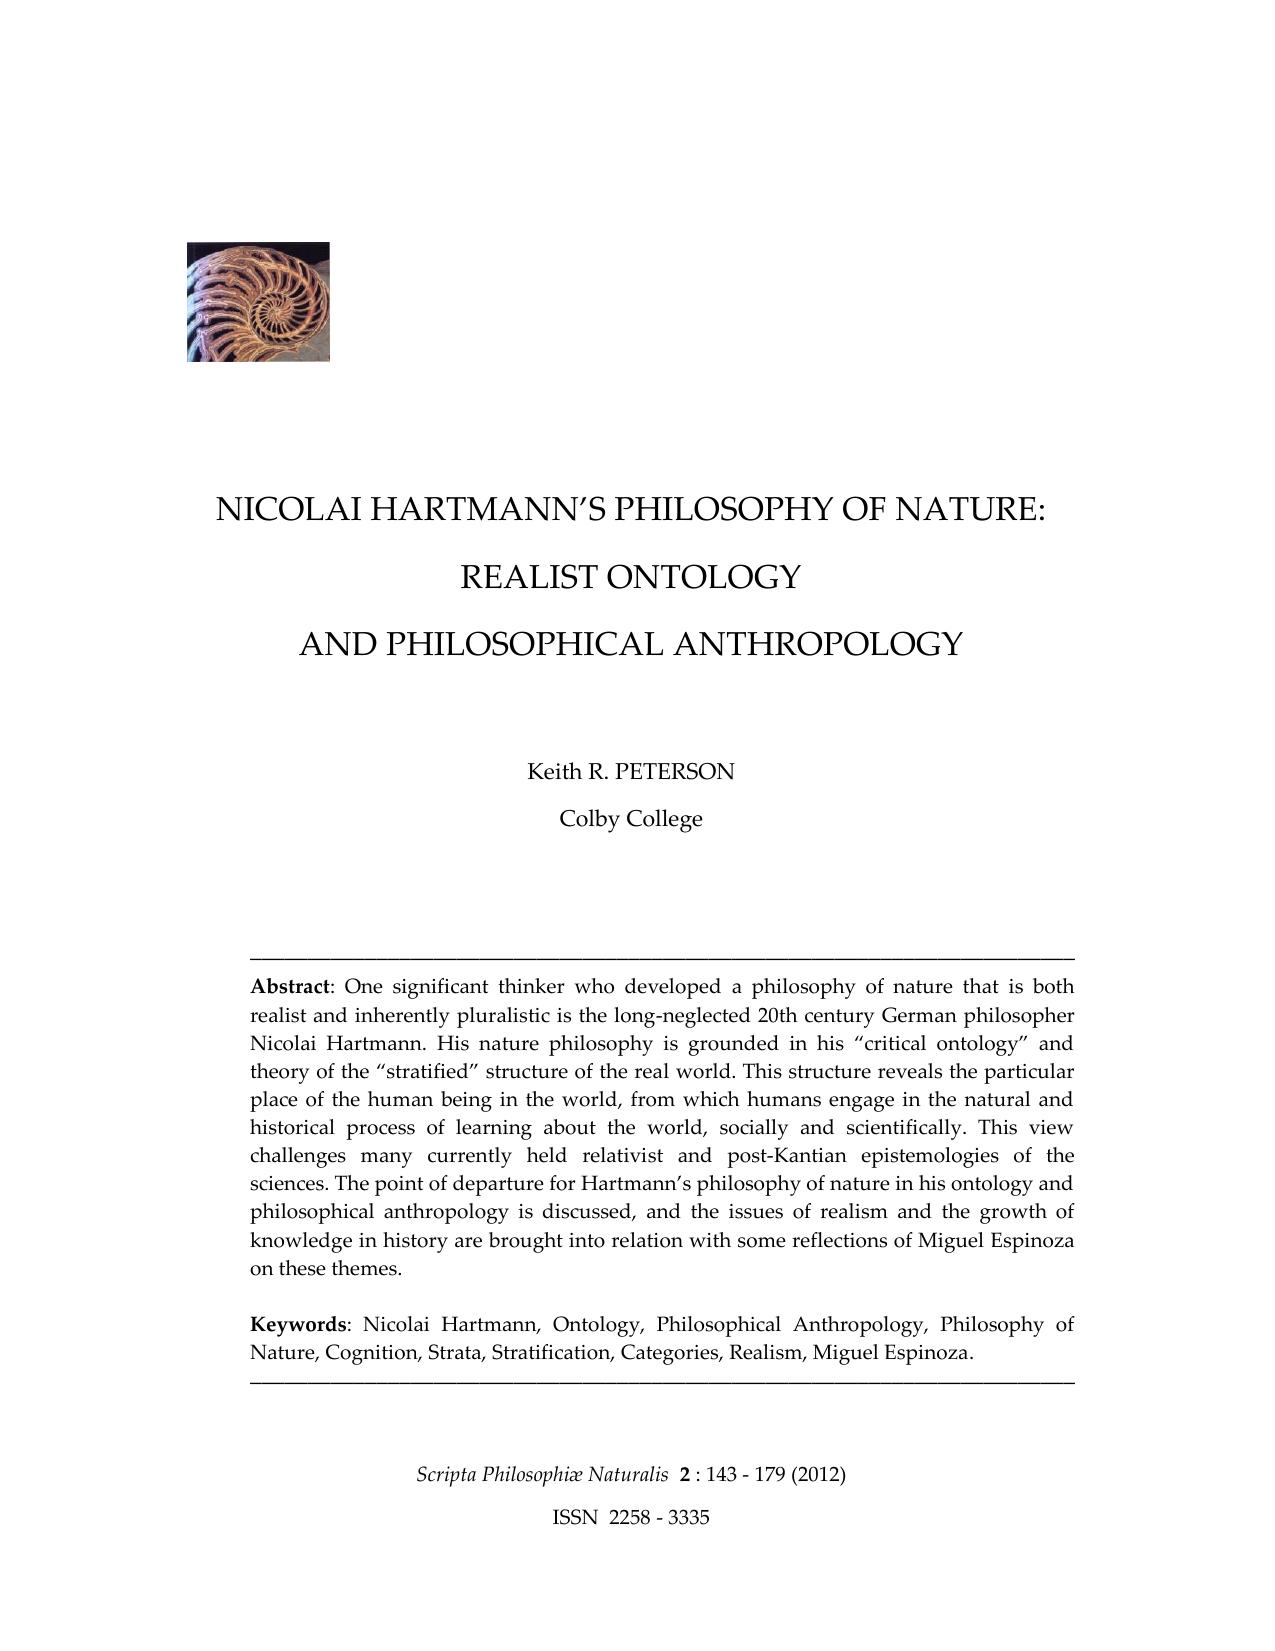 Nicolai Hartmanns Philosophy of Nature - Realist Ontology and Philosophical Anthology - Essay